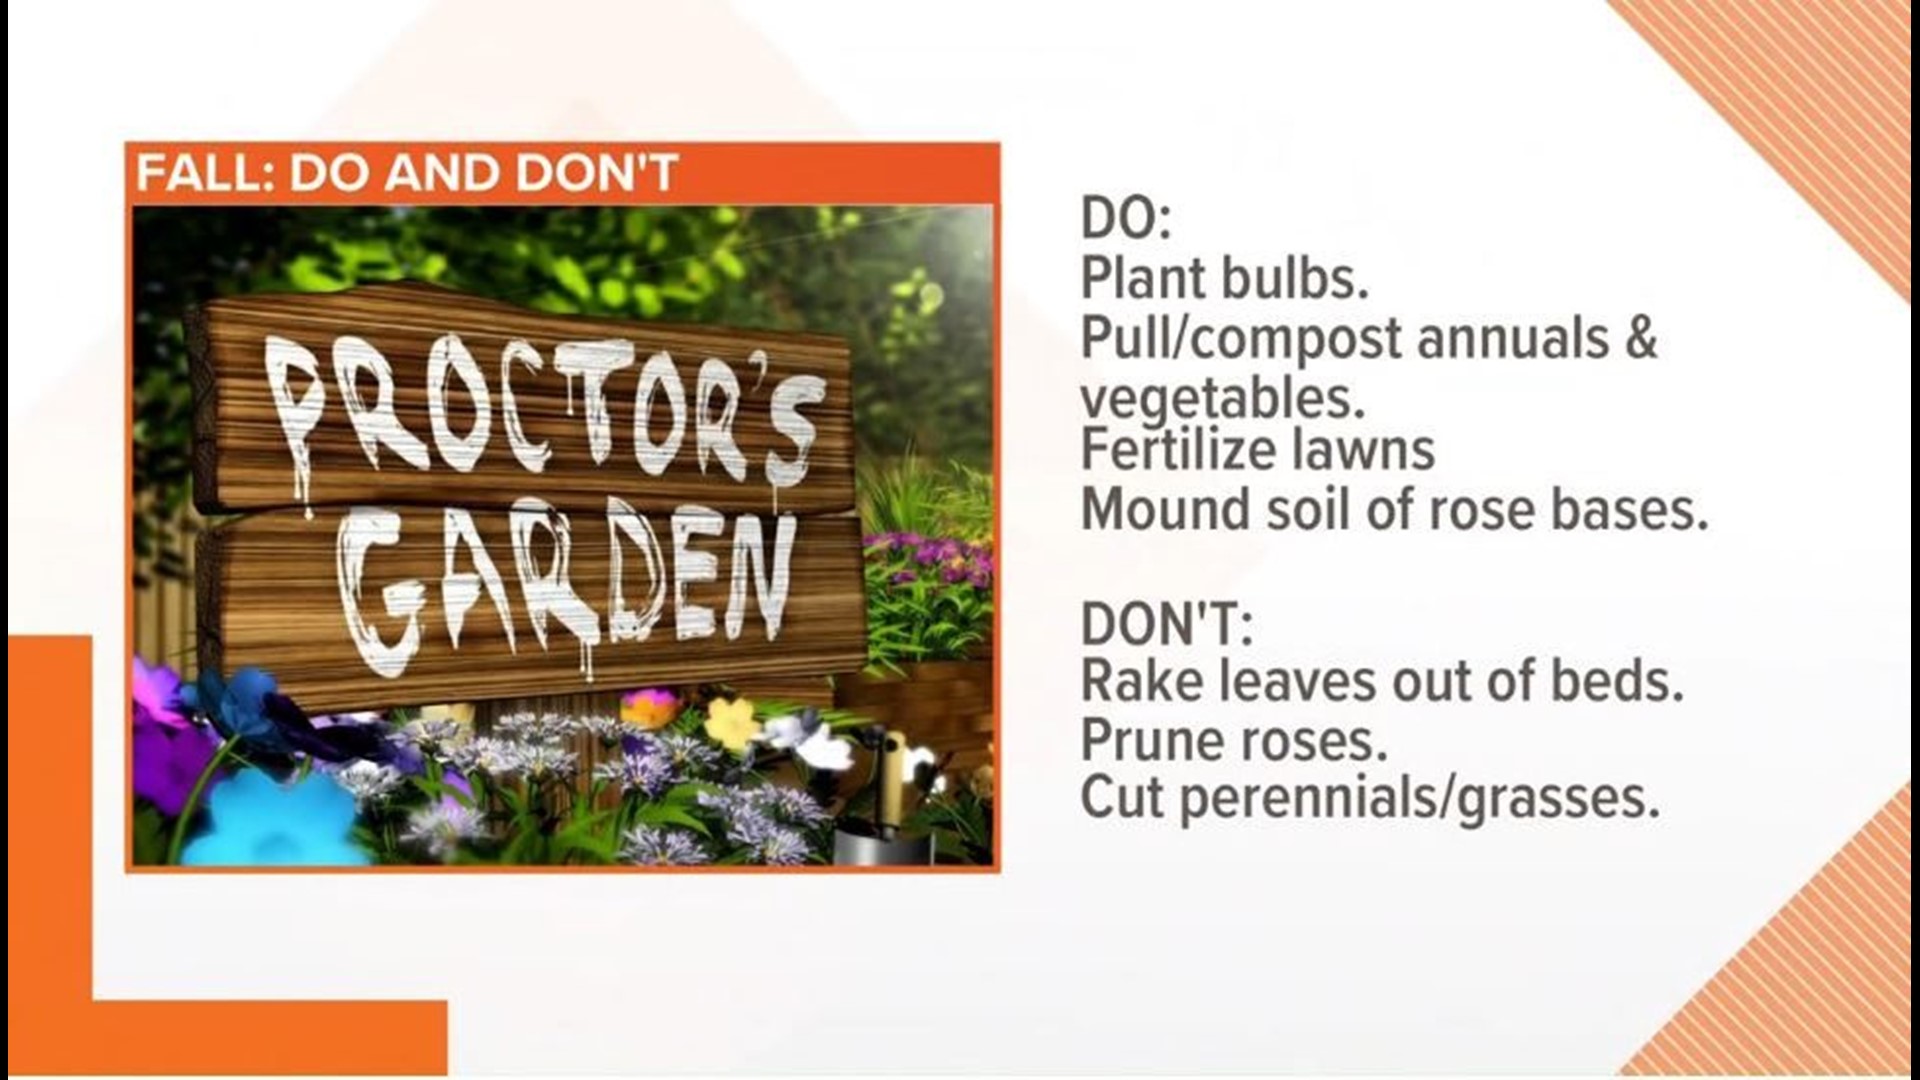 DO: Plant bulbs, Pull and compost annuals and vegetables, Fertilize lawns, Mound soil over the bases of rosesDON'T: Rake leaves out of beds, Send leaves to the dump, Prune roses, Cut back perennials or grasses